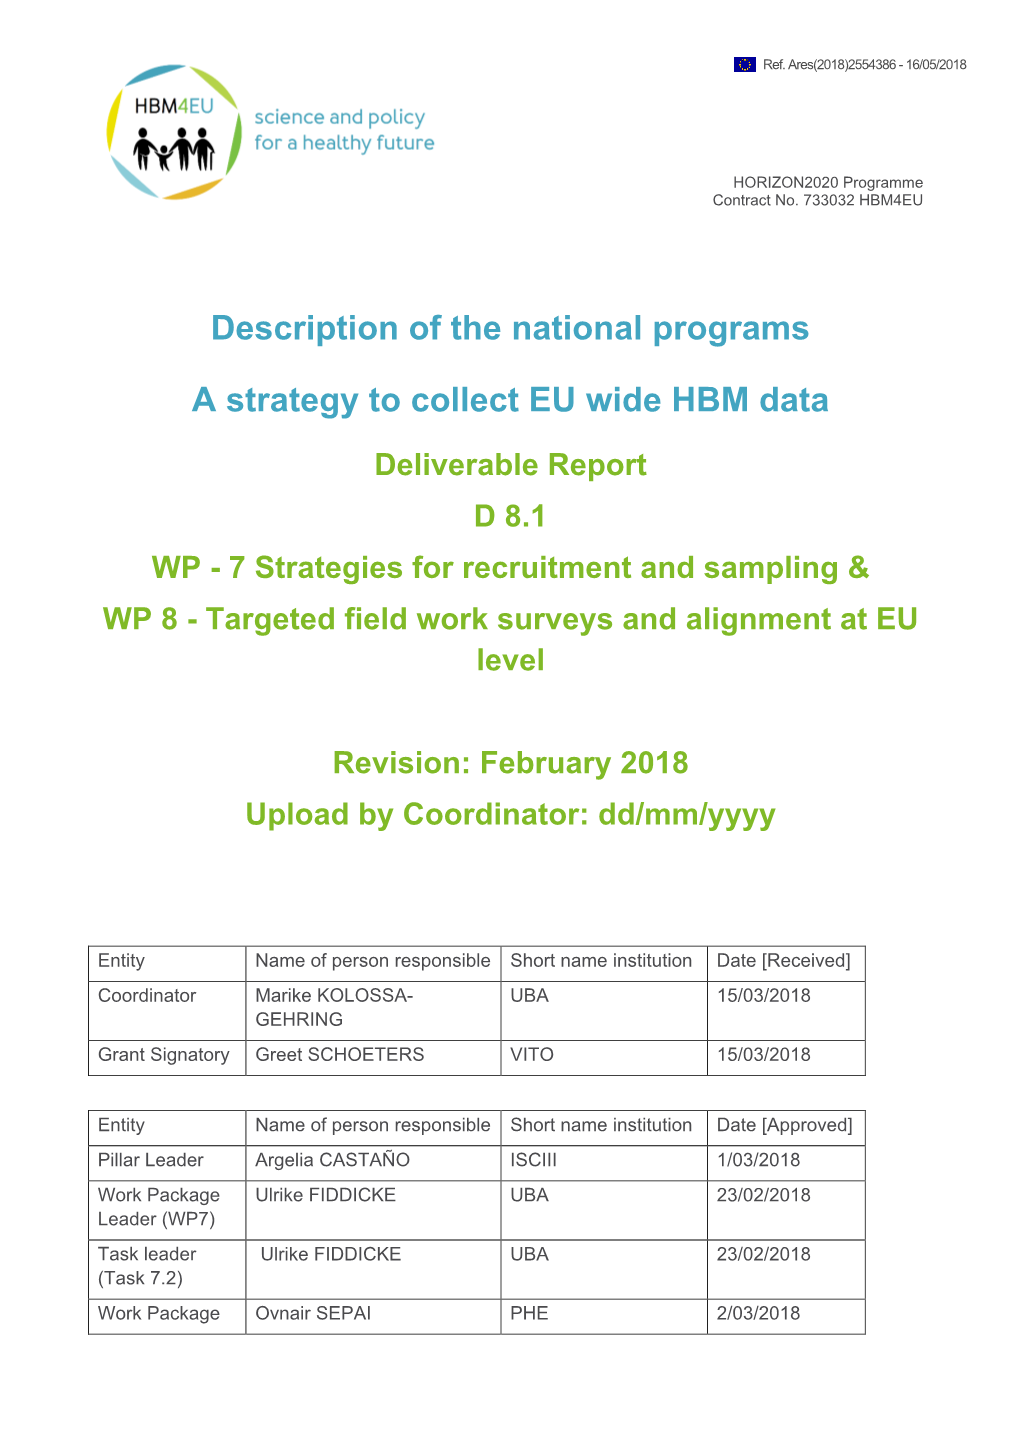 Description of the National Programs a Strategy to Collect EU Wide HBM Data